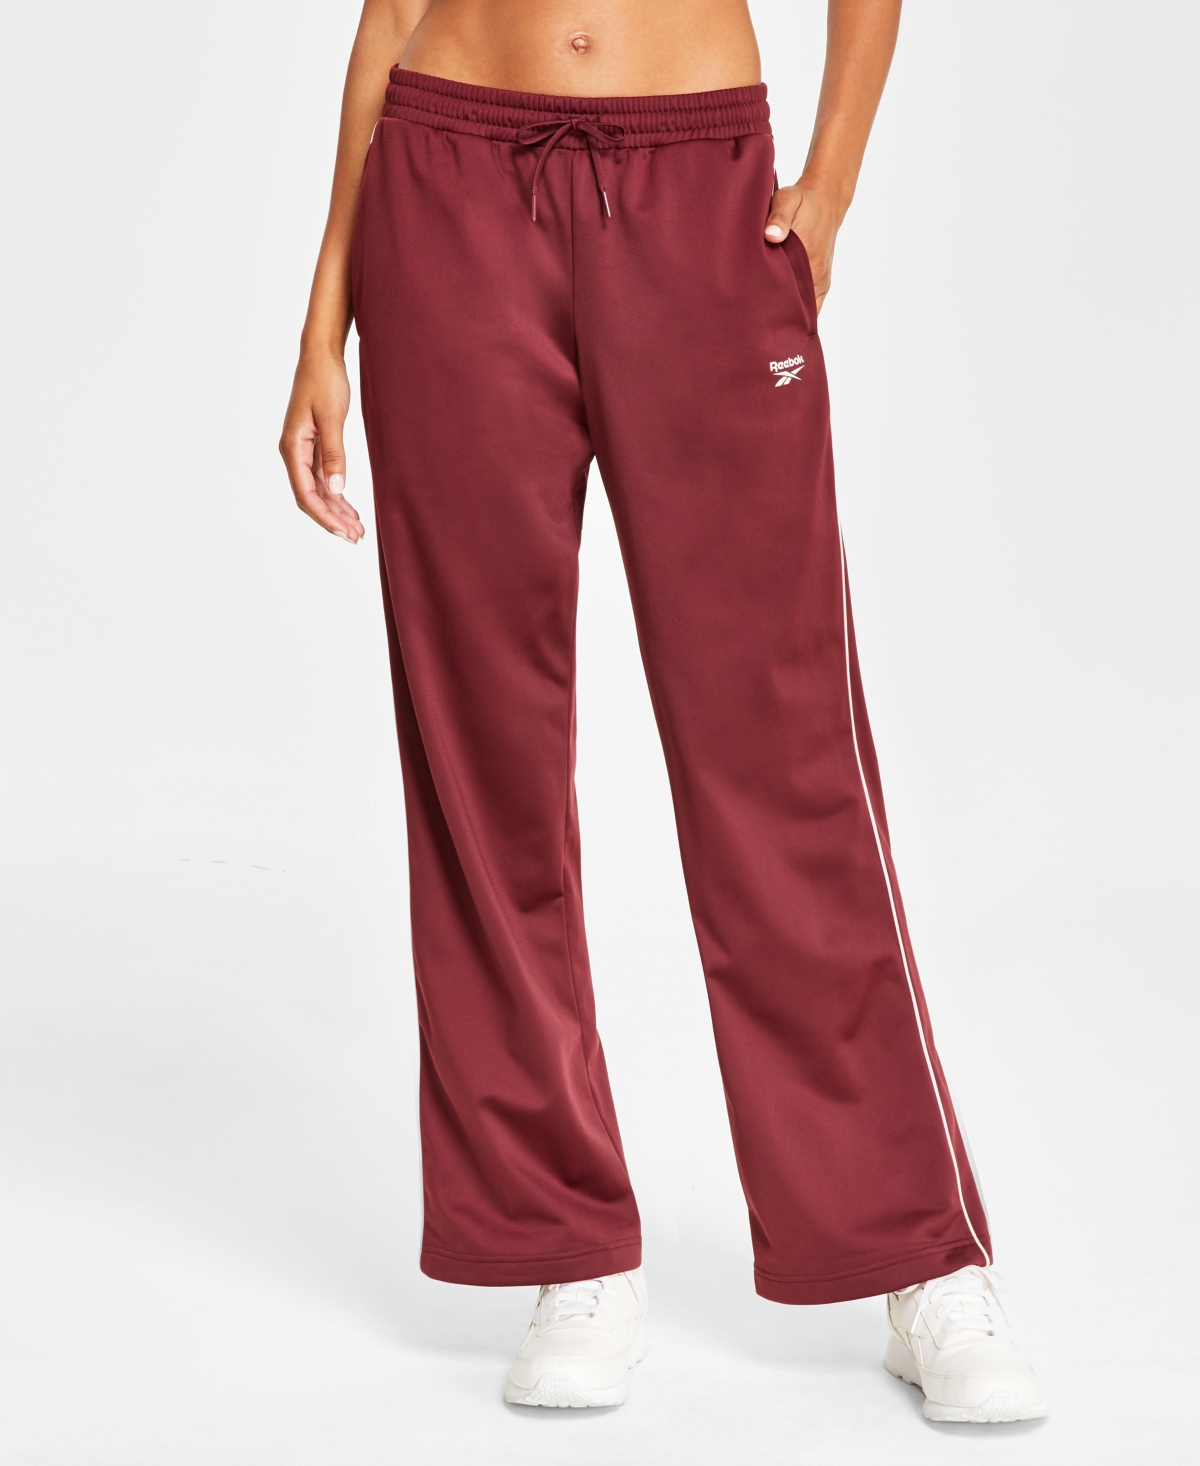 Reebok Women's Pull-on Drawstring Tricot Pants, A Macy's Exclusive In Classic Maroon F